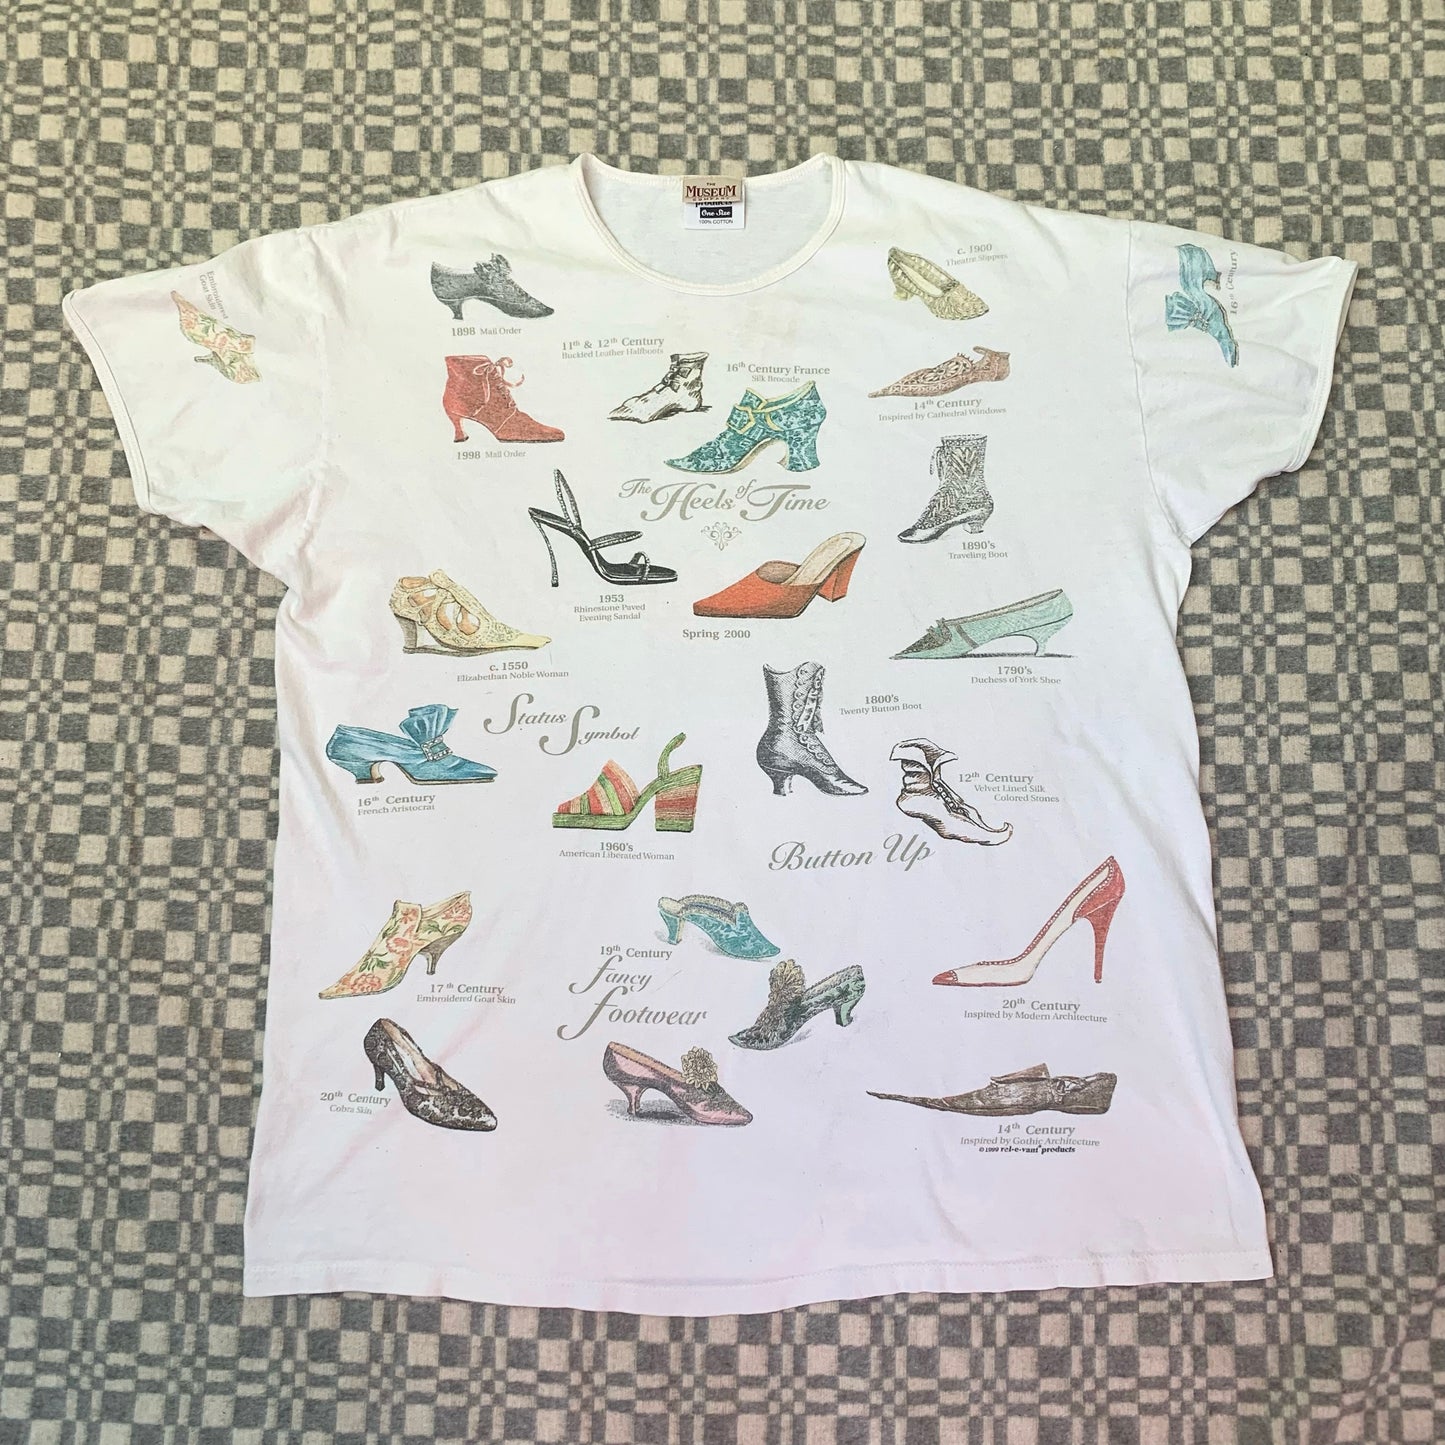 “Heels of Time” T-shirt